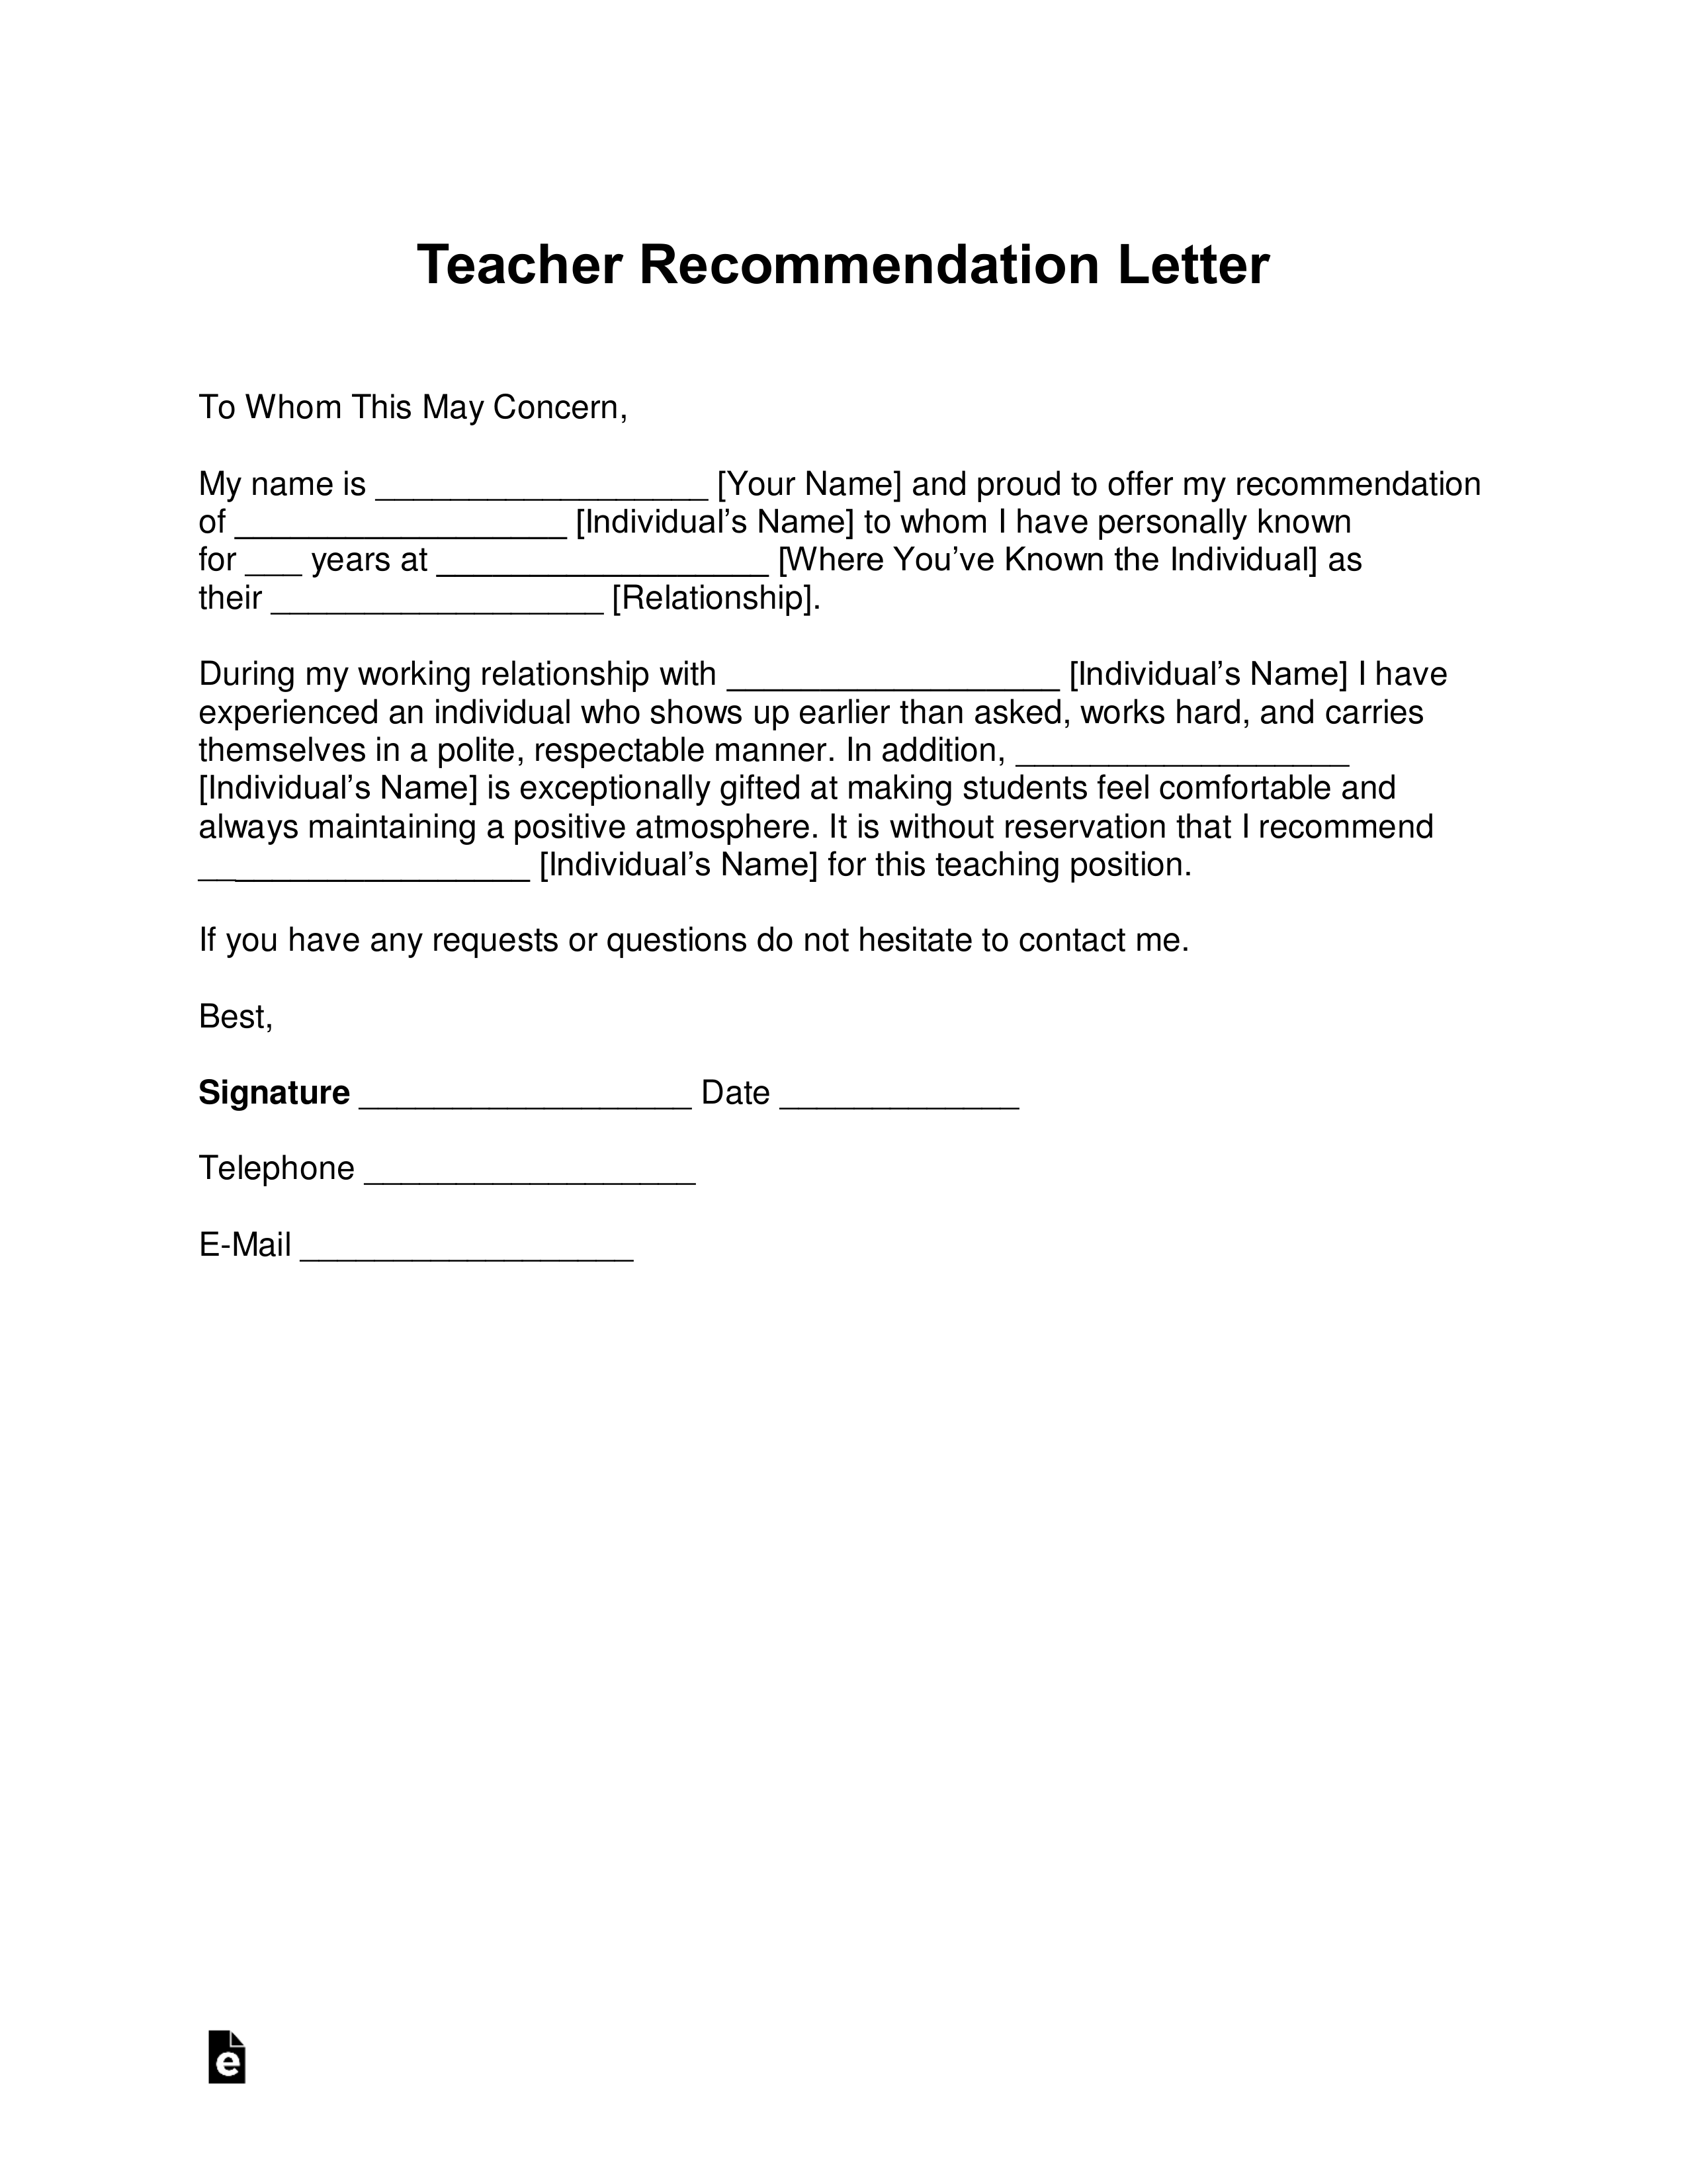 Letter To Teacher Format from eforms.com